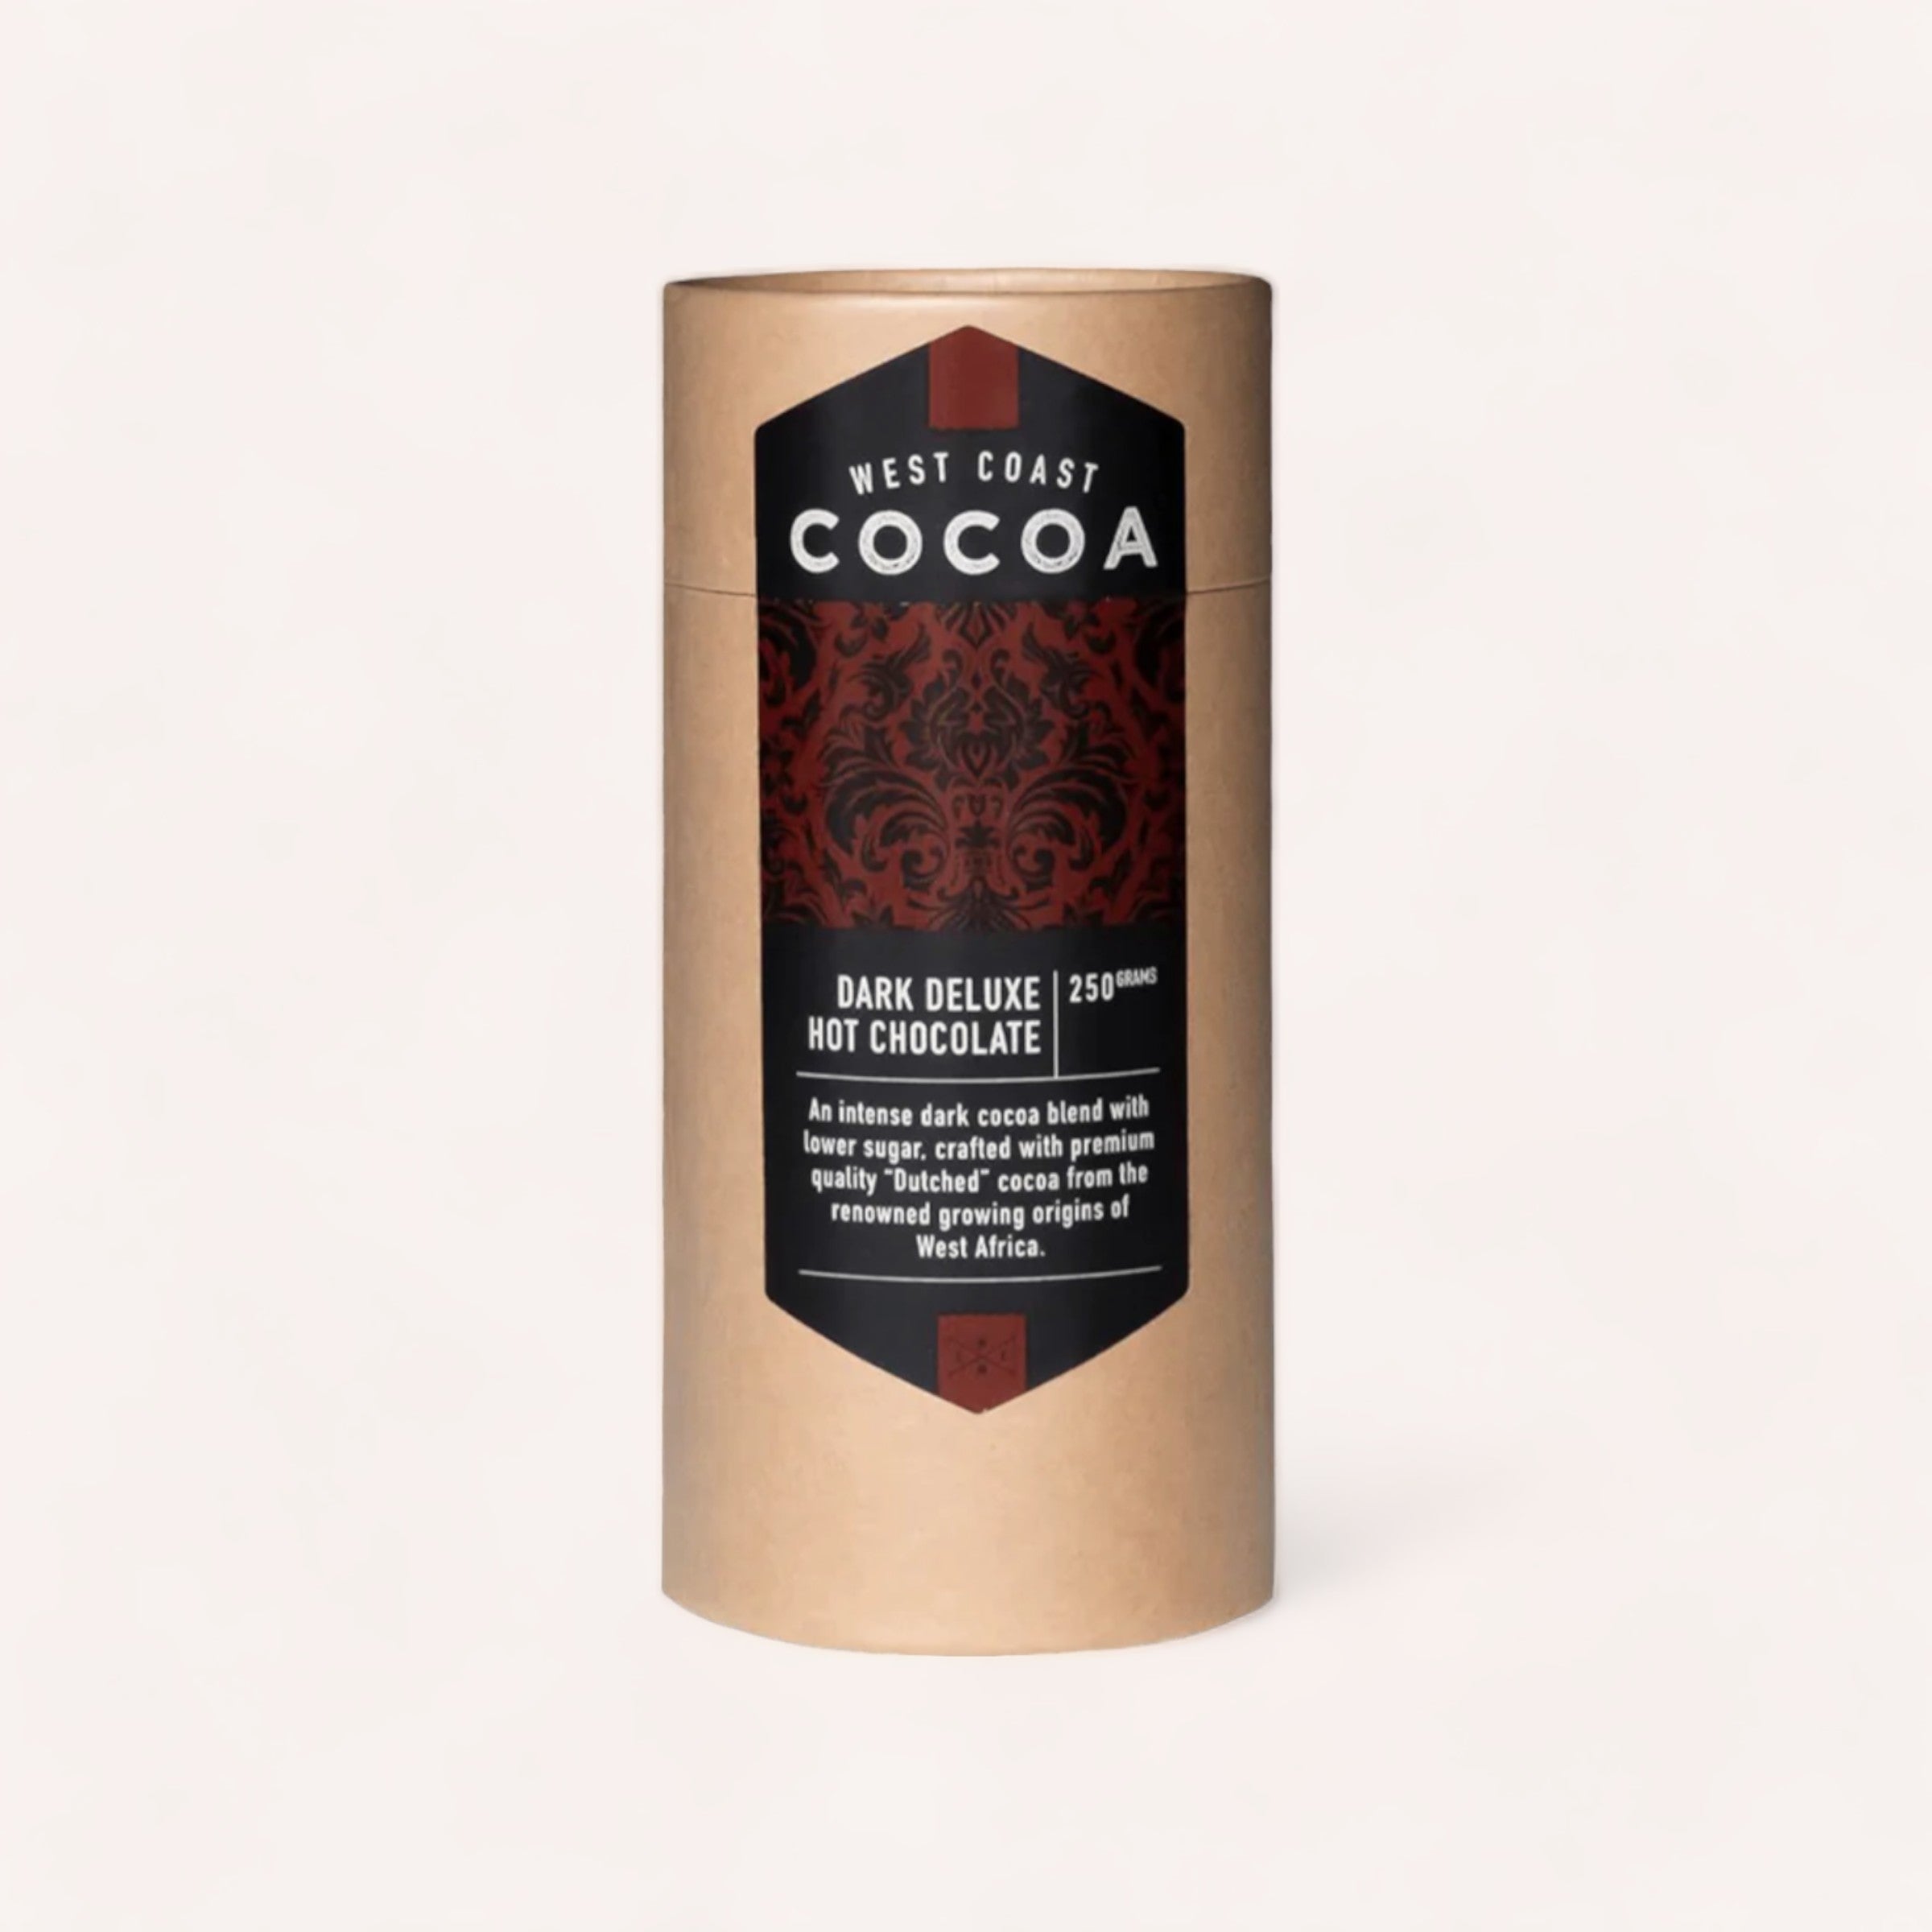 deluxe dark hot chocolate by west coast cocoa